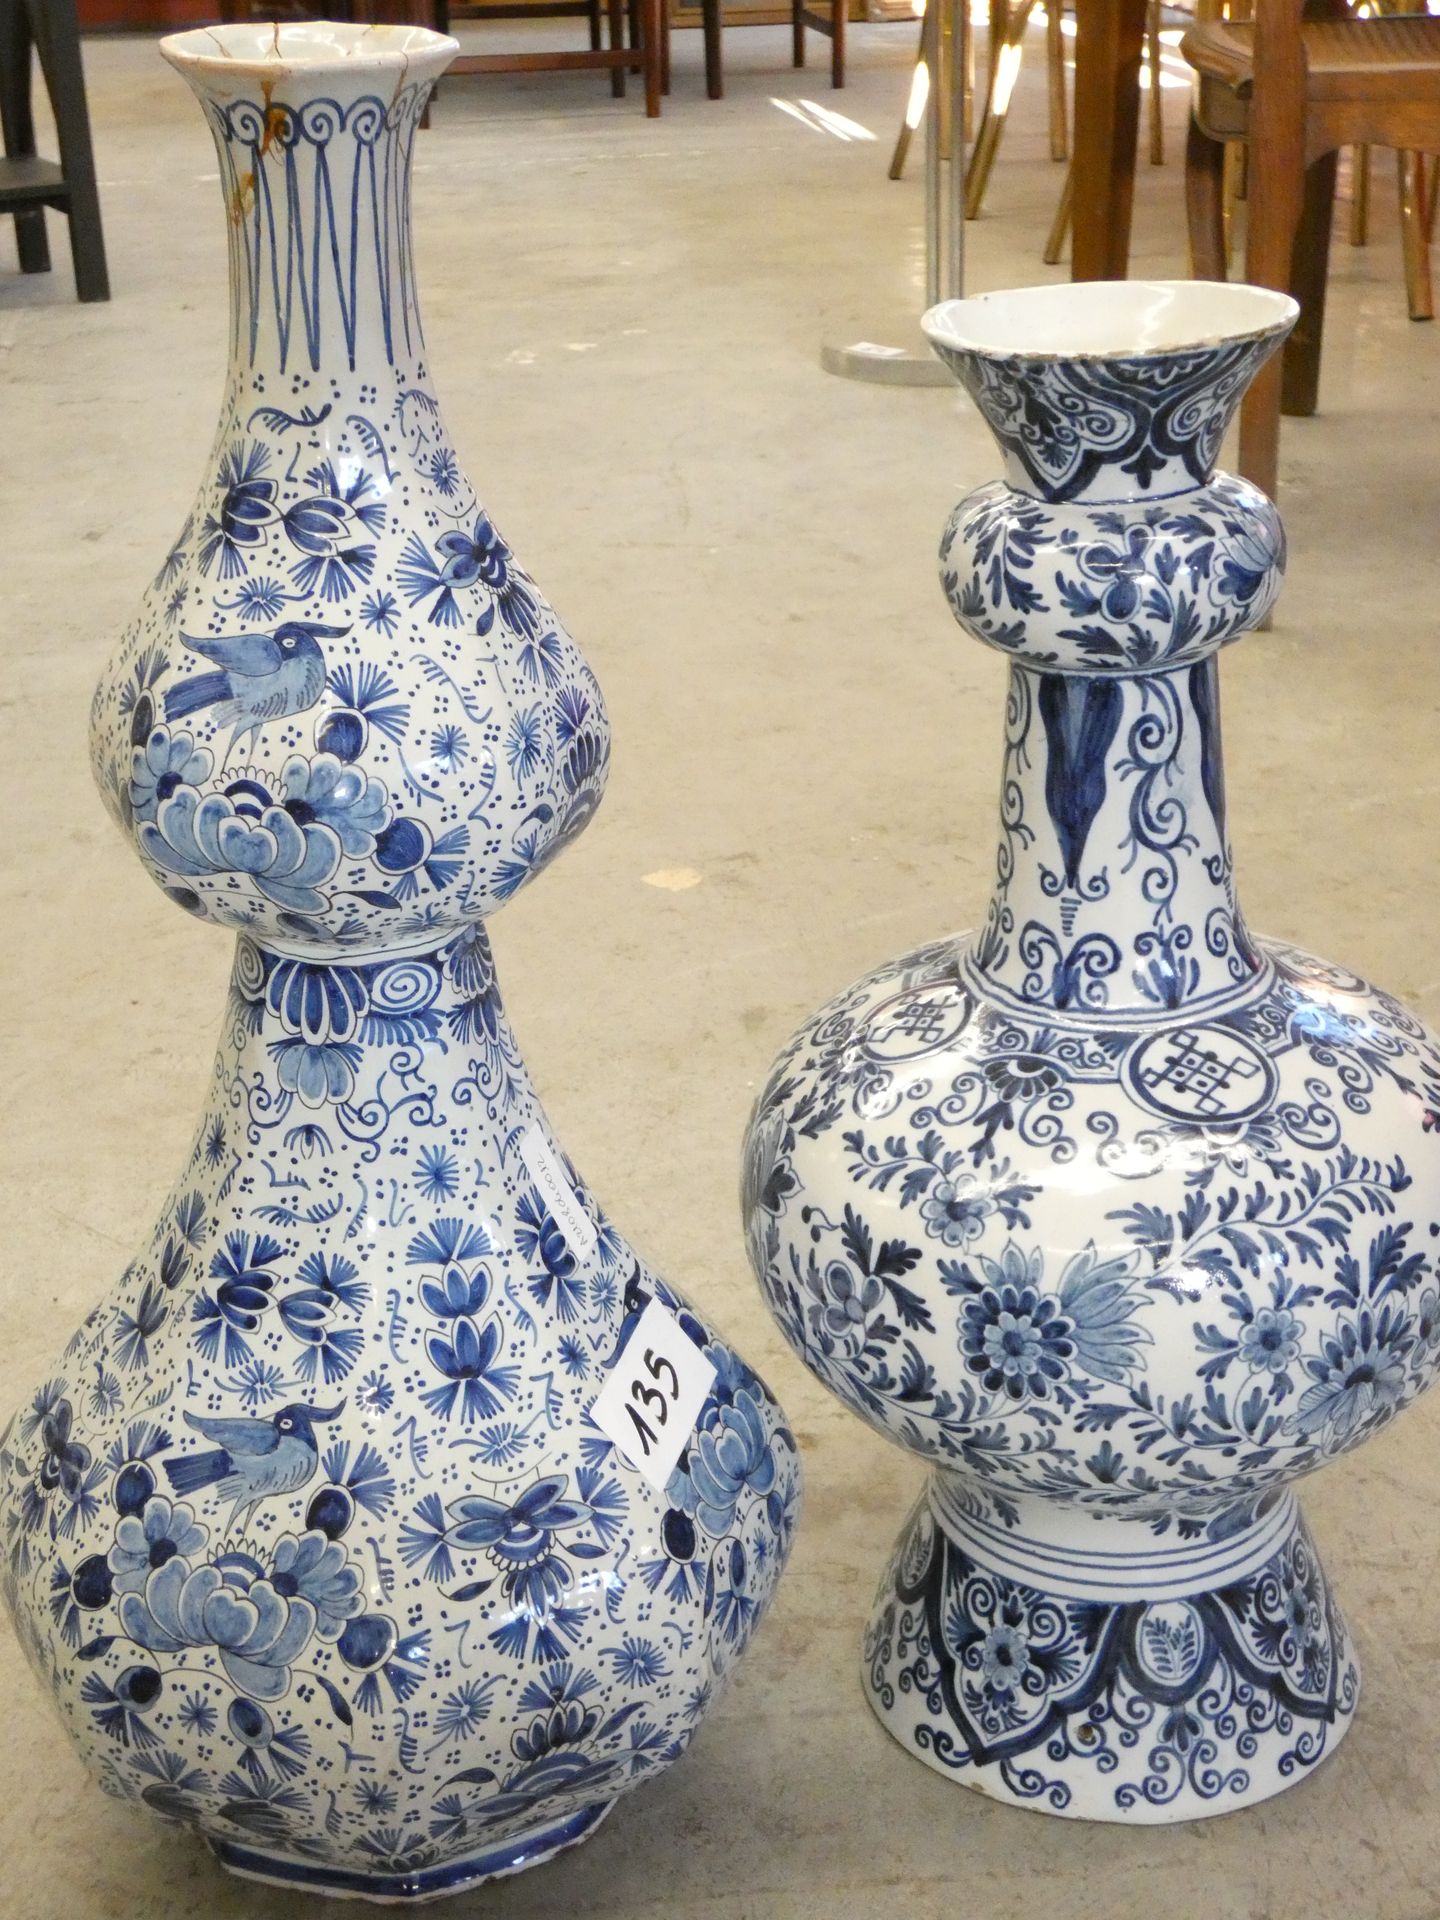 Null 
2 DELFT VASES OF WHICH 1 IN THE STATE